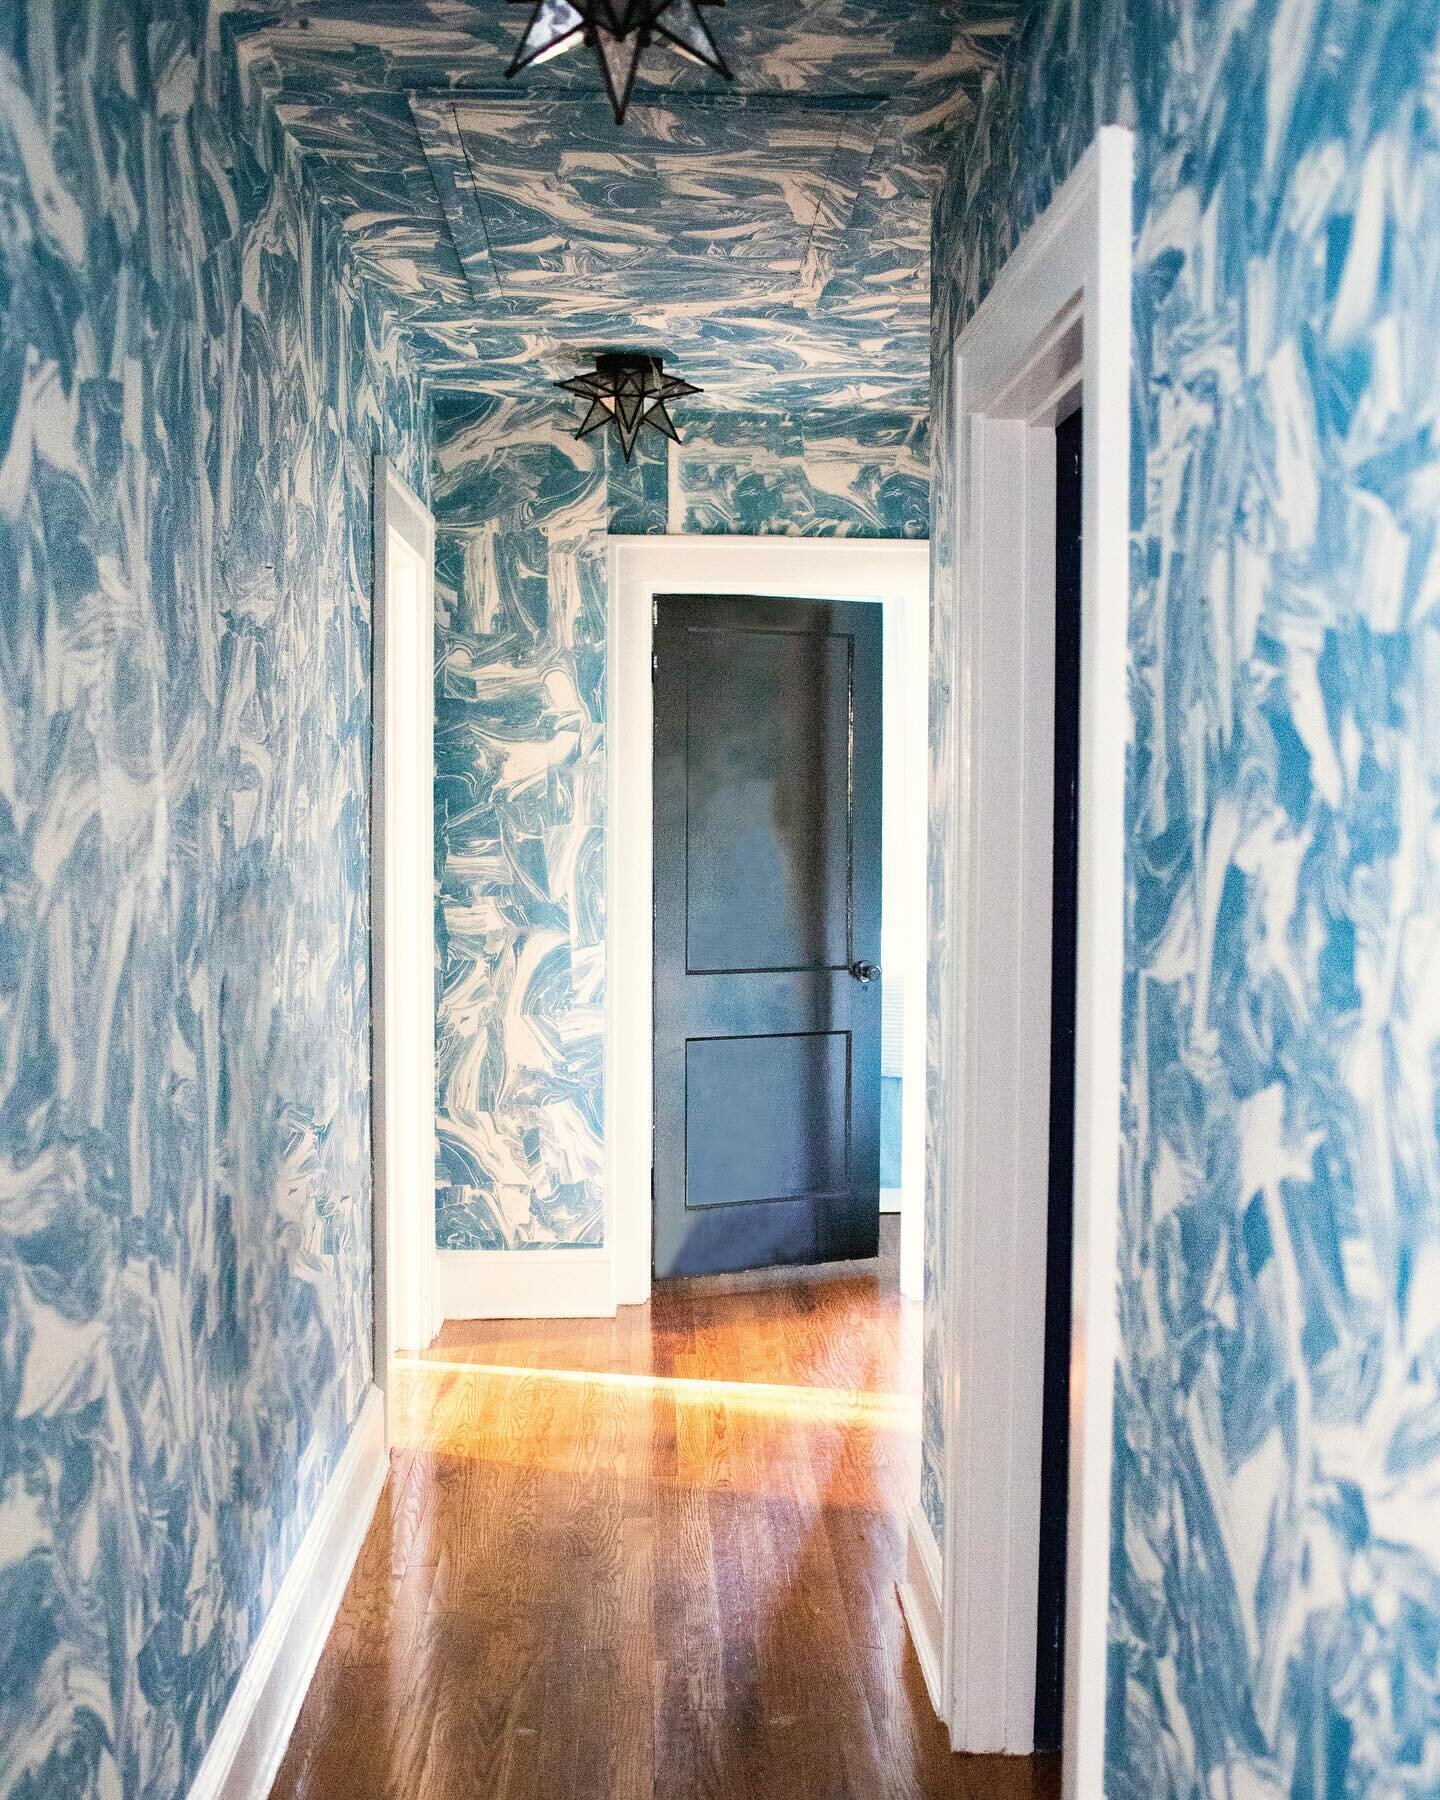 Today is the day! Congrats to @haskellharris on the launch of her gorgeous book, The House Romantic. Here are some of my favorite pictures showing Haskell&rsquo;s creativity:

Image 1: You might think the marbled walls are wallpaper, but Haskell used